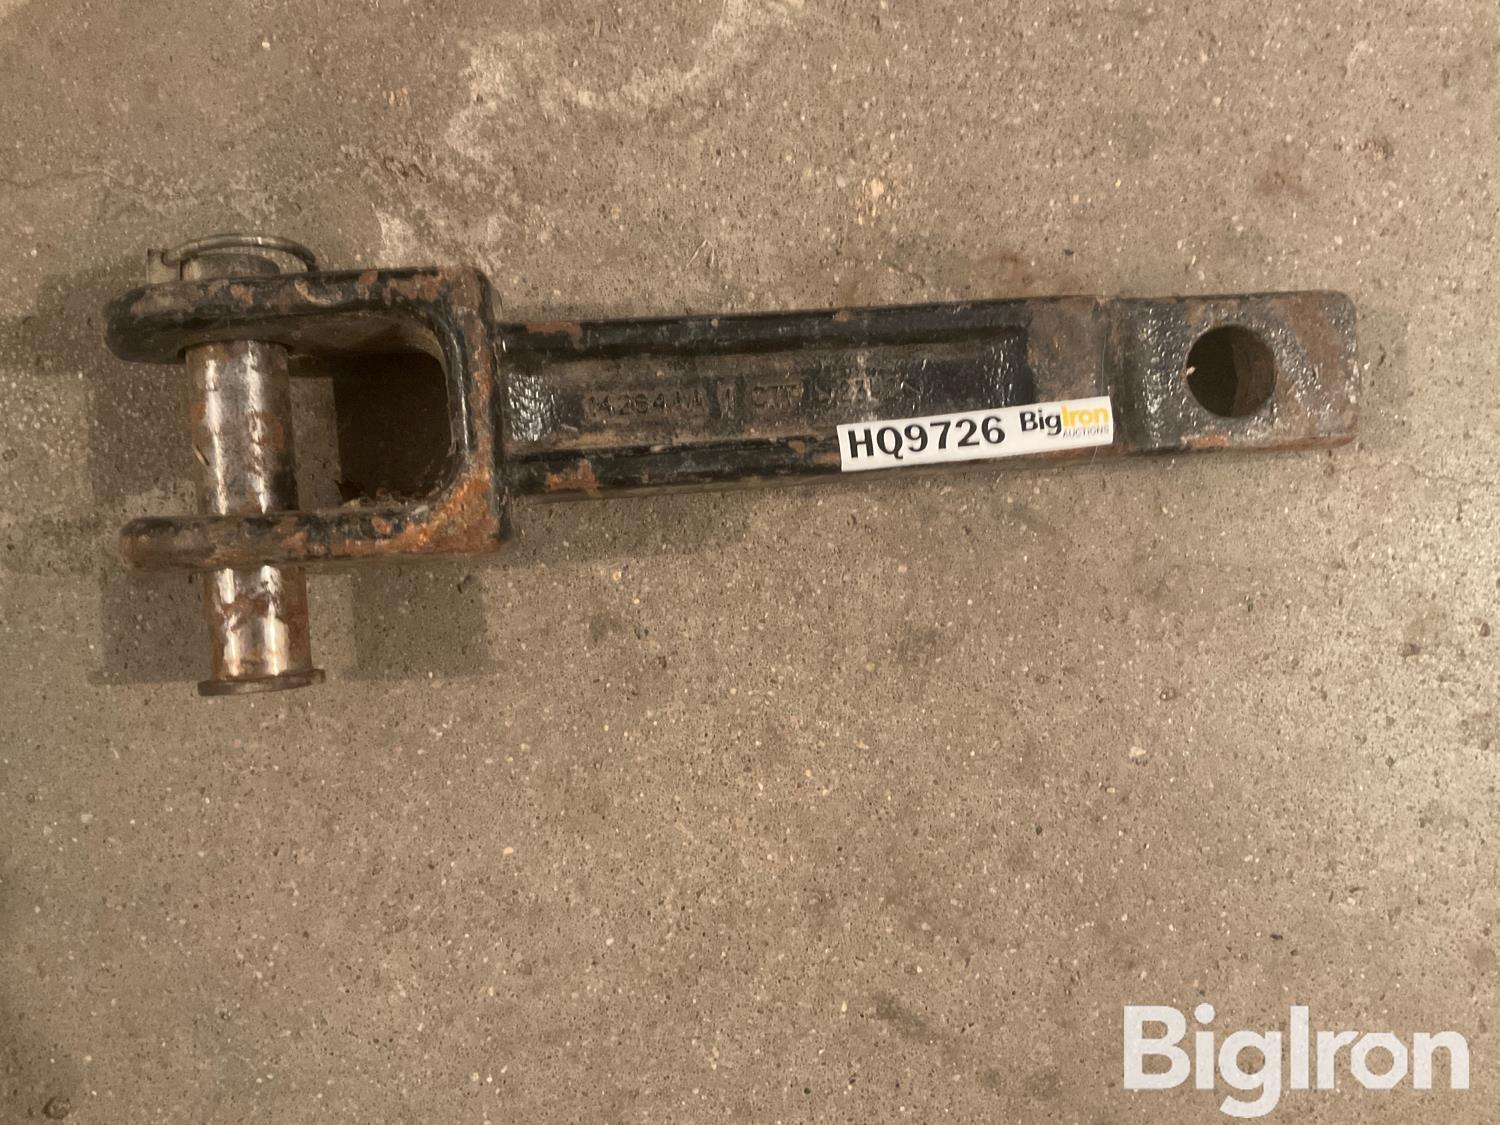 Kenworth T-800 Front Bumper Pull Hitch BigIron Auctions